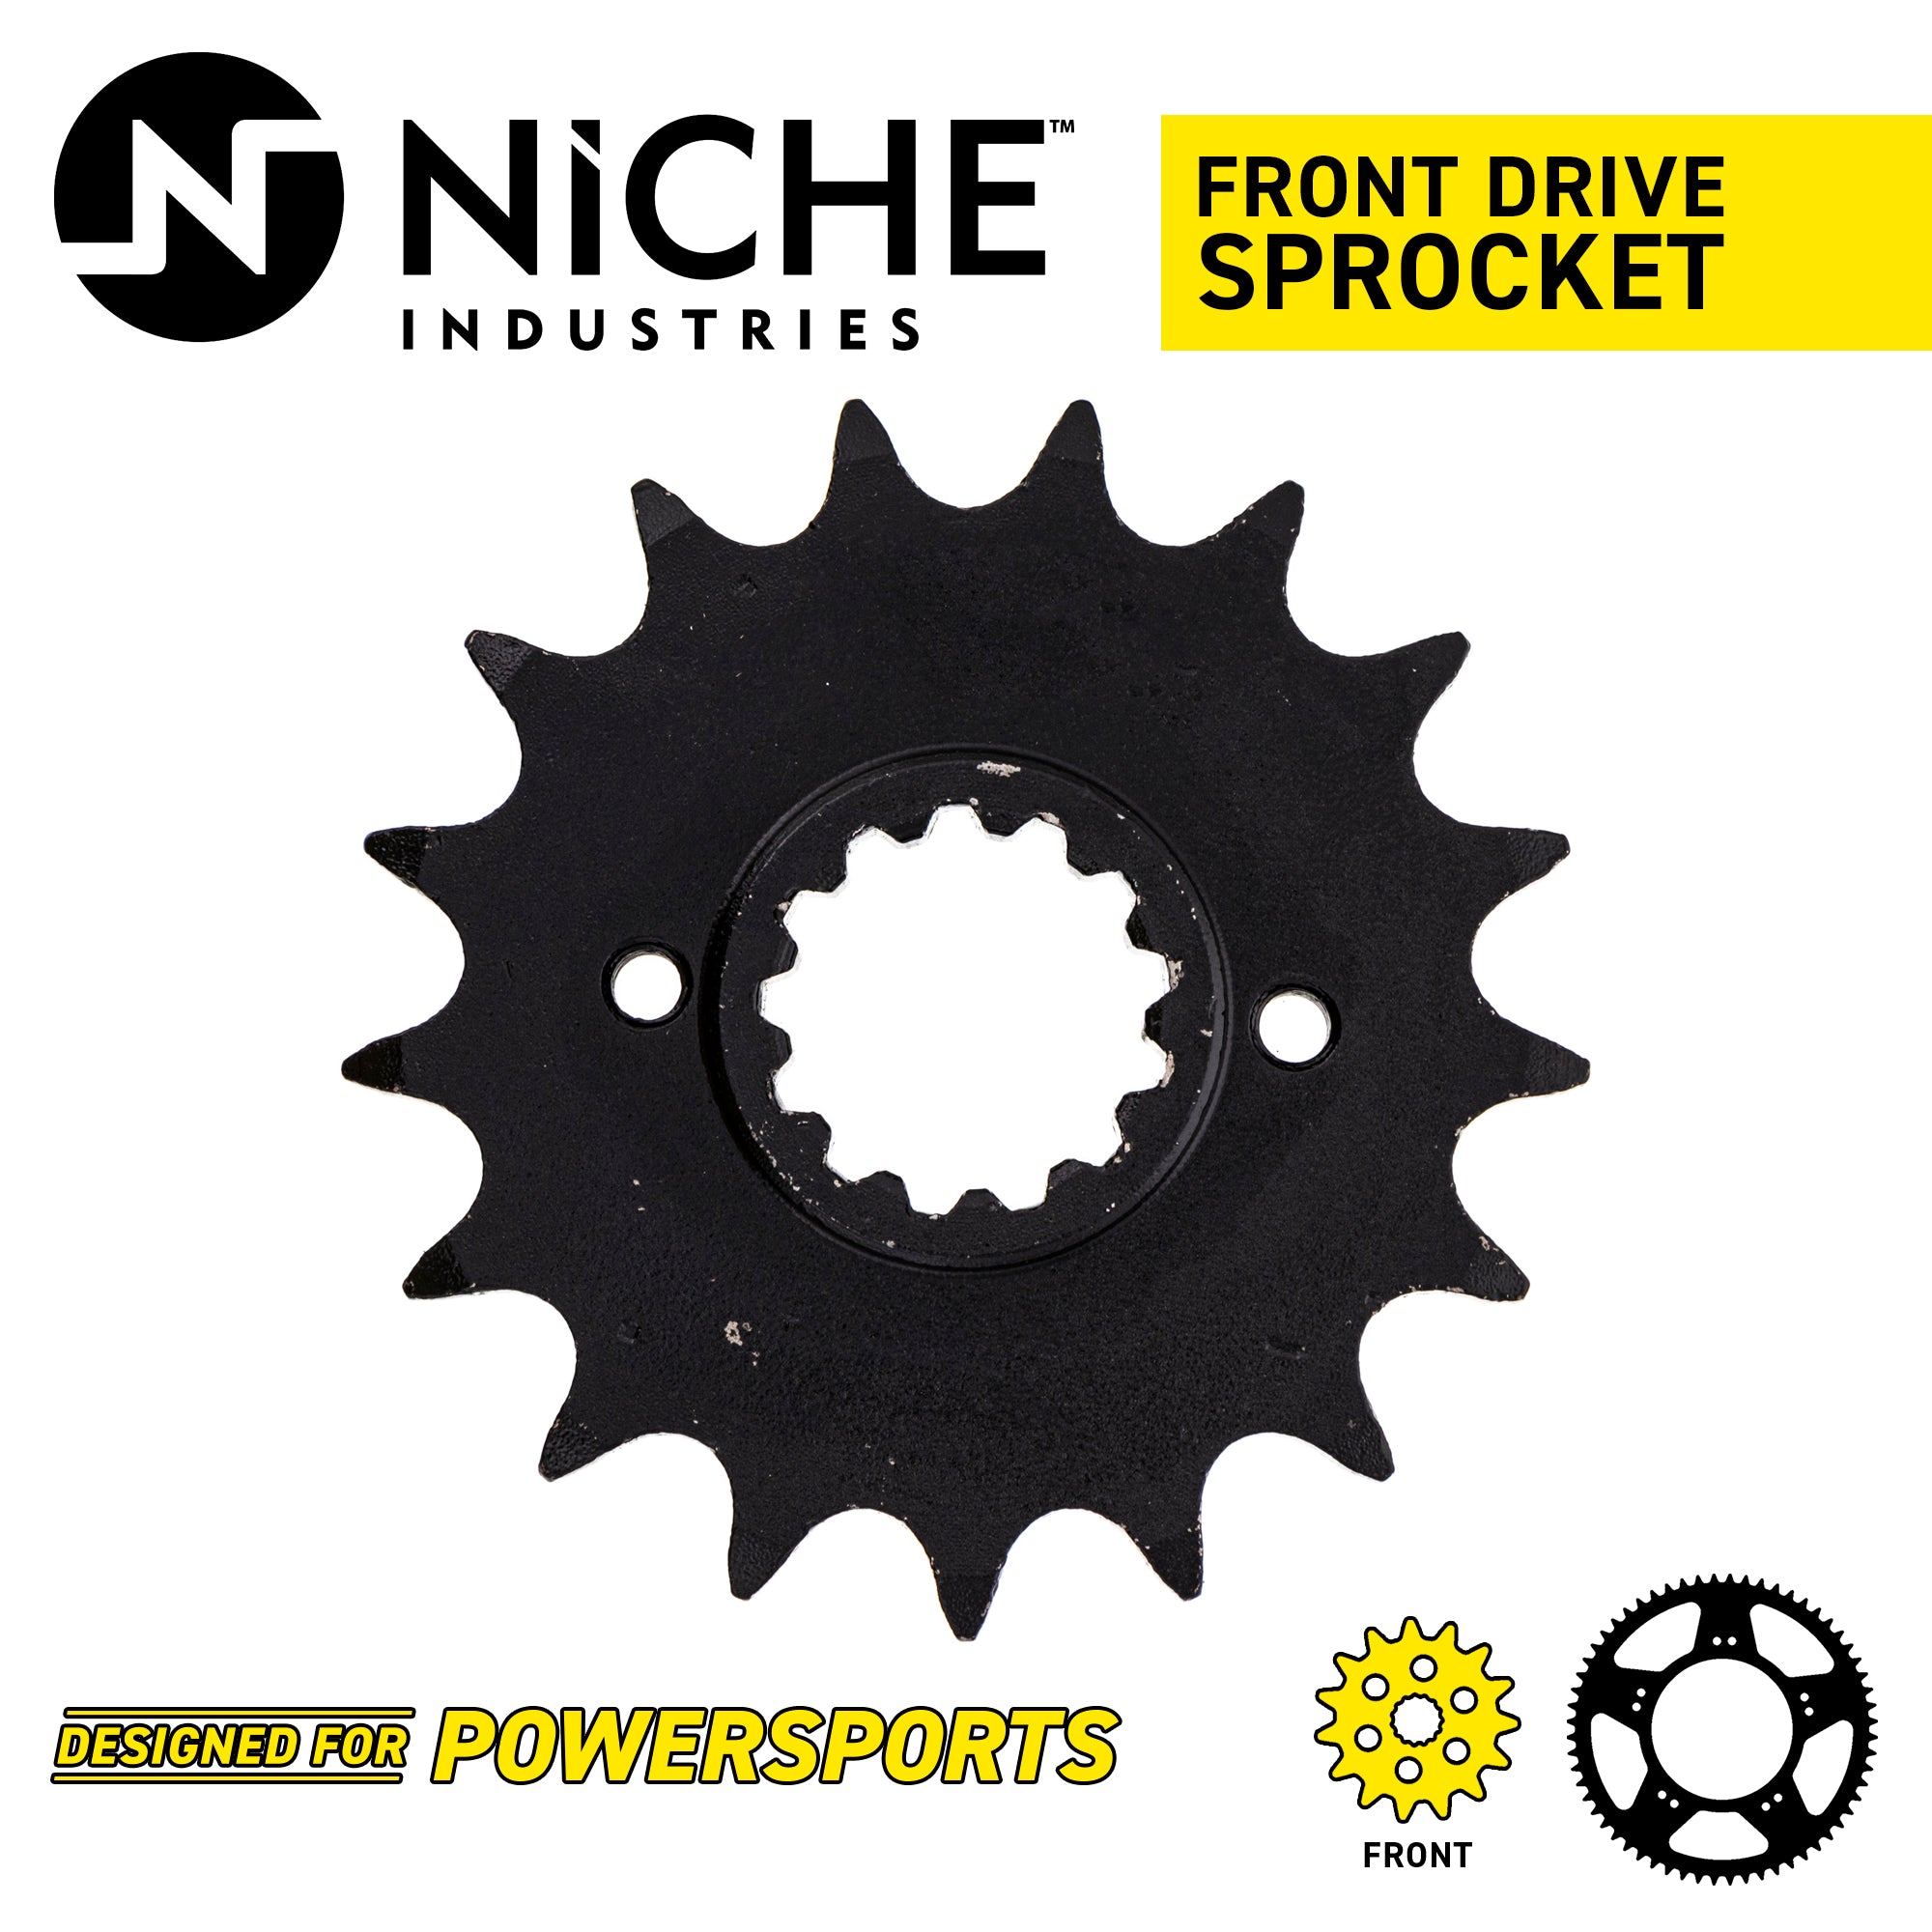 NICHE 519-CDS2386P Tooth Front Drive Sprocket for zOTHER JT Sprocket